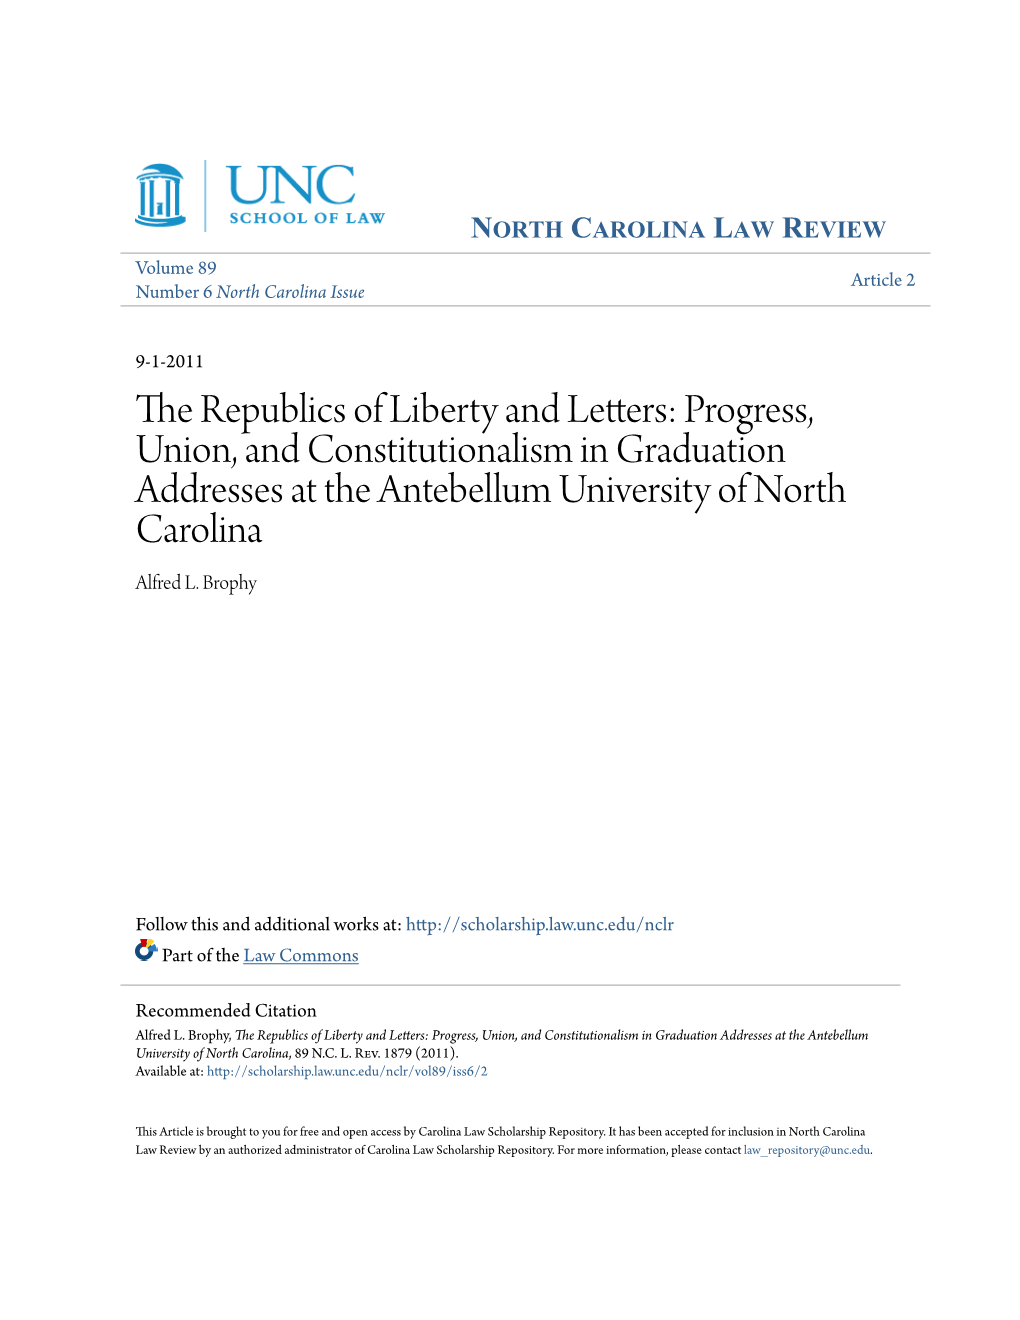 The Republics of Liberty and Letters: Progress, Union, and Constitutionalism in Graduation Addresses at the Antebellum University of North Carolina Alfred L